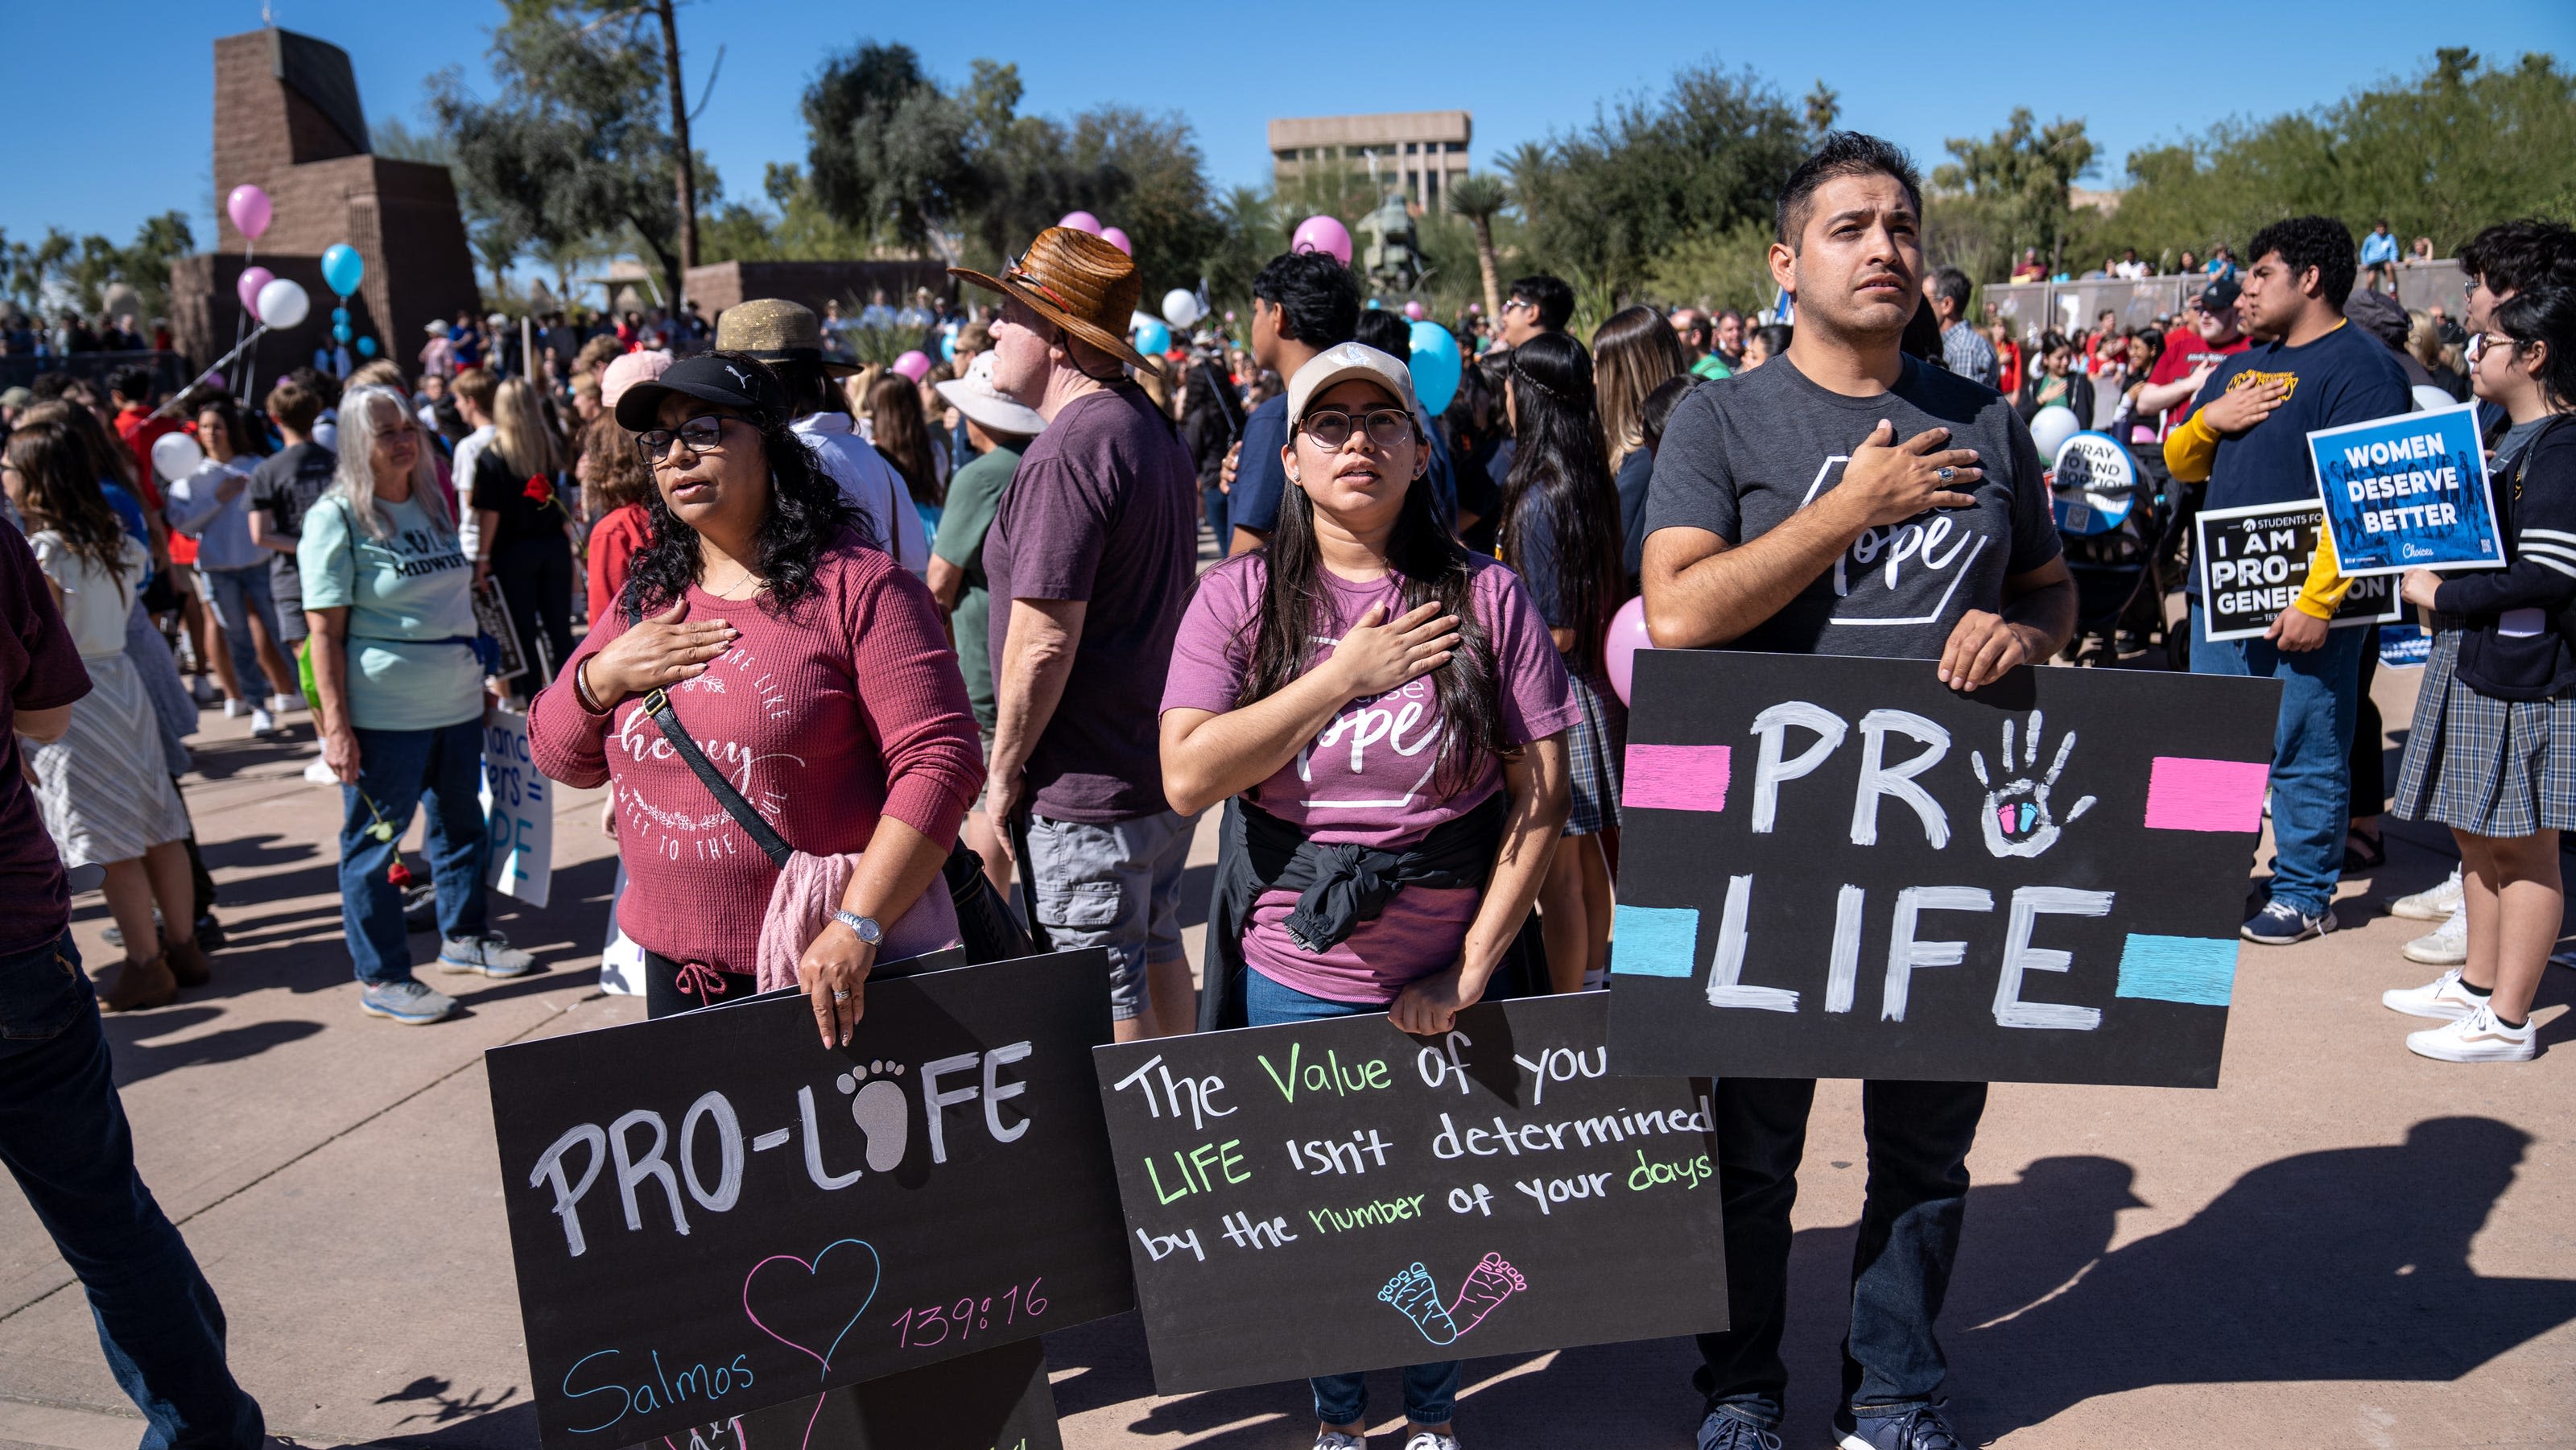 Abortion opponents want Arizona Supreme Court to reject 'unjust delay' in implementing 1864 ban